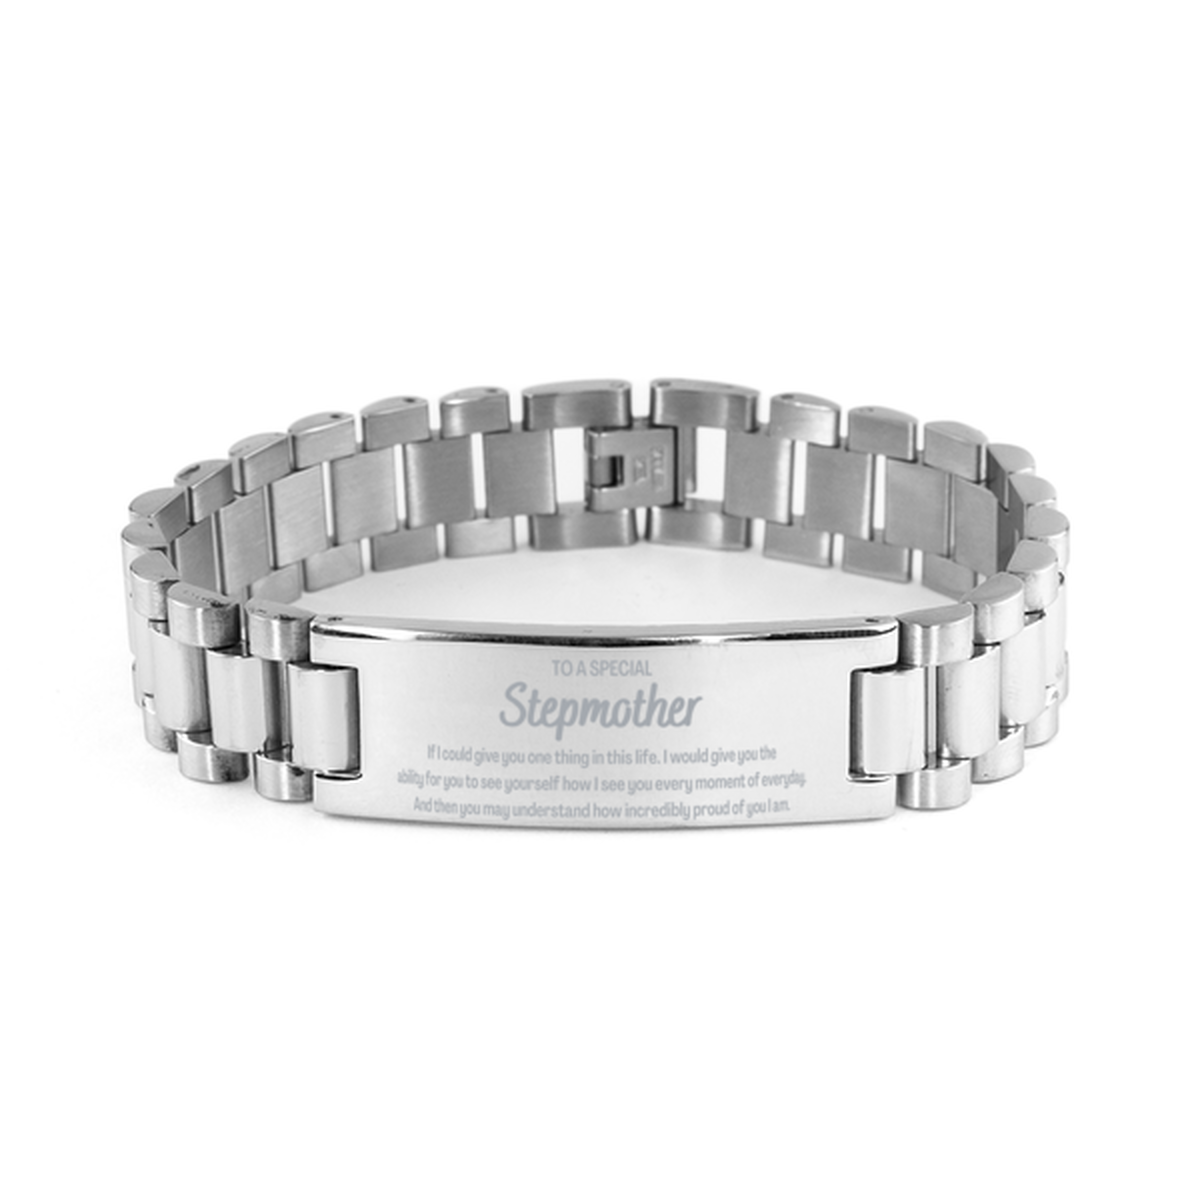 To My Stepmother Ladder Stainless Steel Bracelet, Gifts For Stepmother Engraved, Inspirational Gifts for Christmas Birthday, Epic Gifts for Stepmother To A Special Stepmother how incredibly proud of you I am